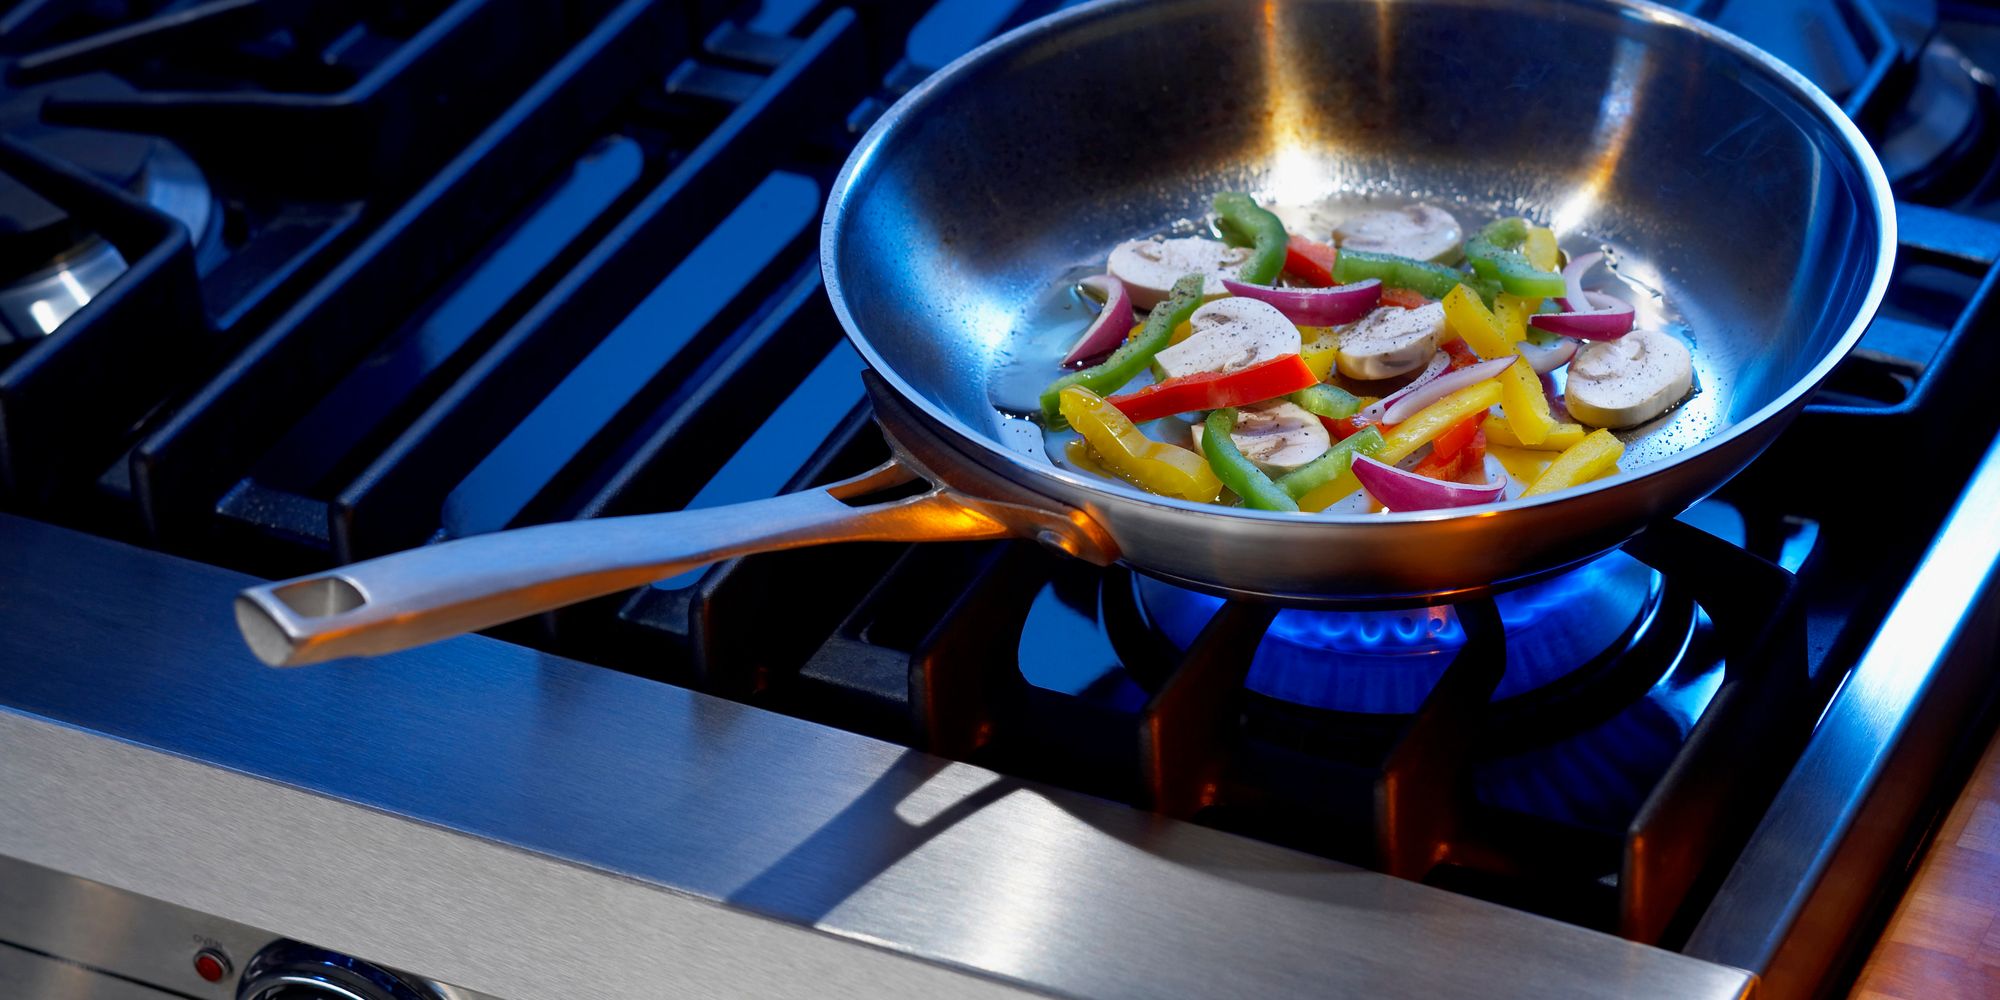 Dubious New Study Suggests Deep-Frying Vegetables Makes Them Healthier ...